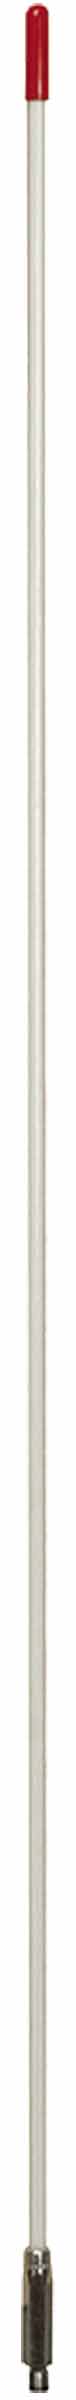 Rusty Rooster 4.5 Foot Cb Antenna (White)